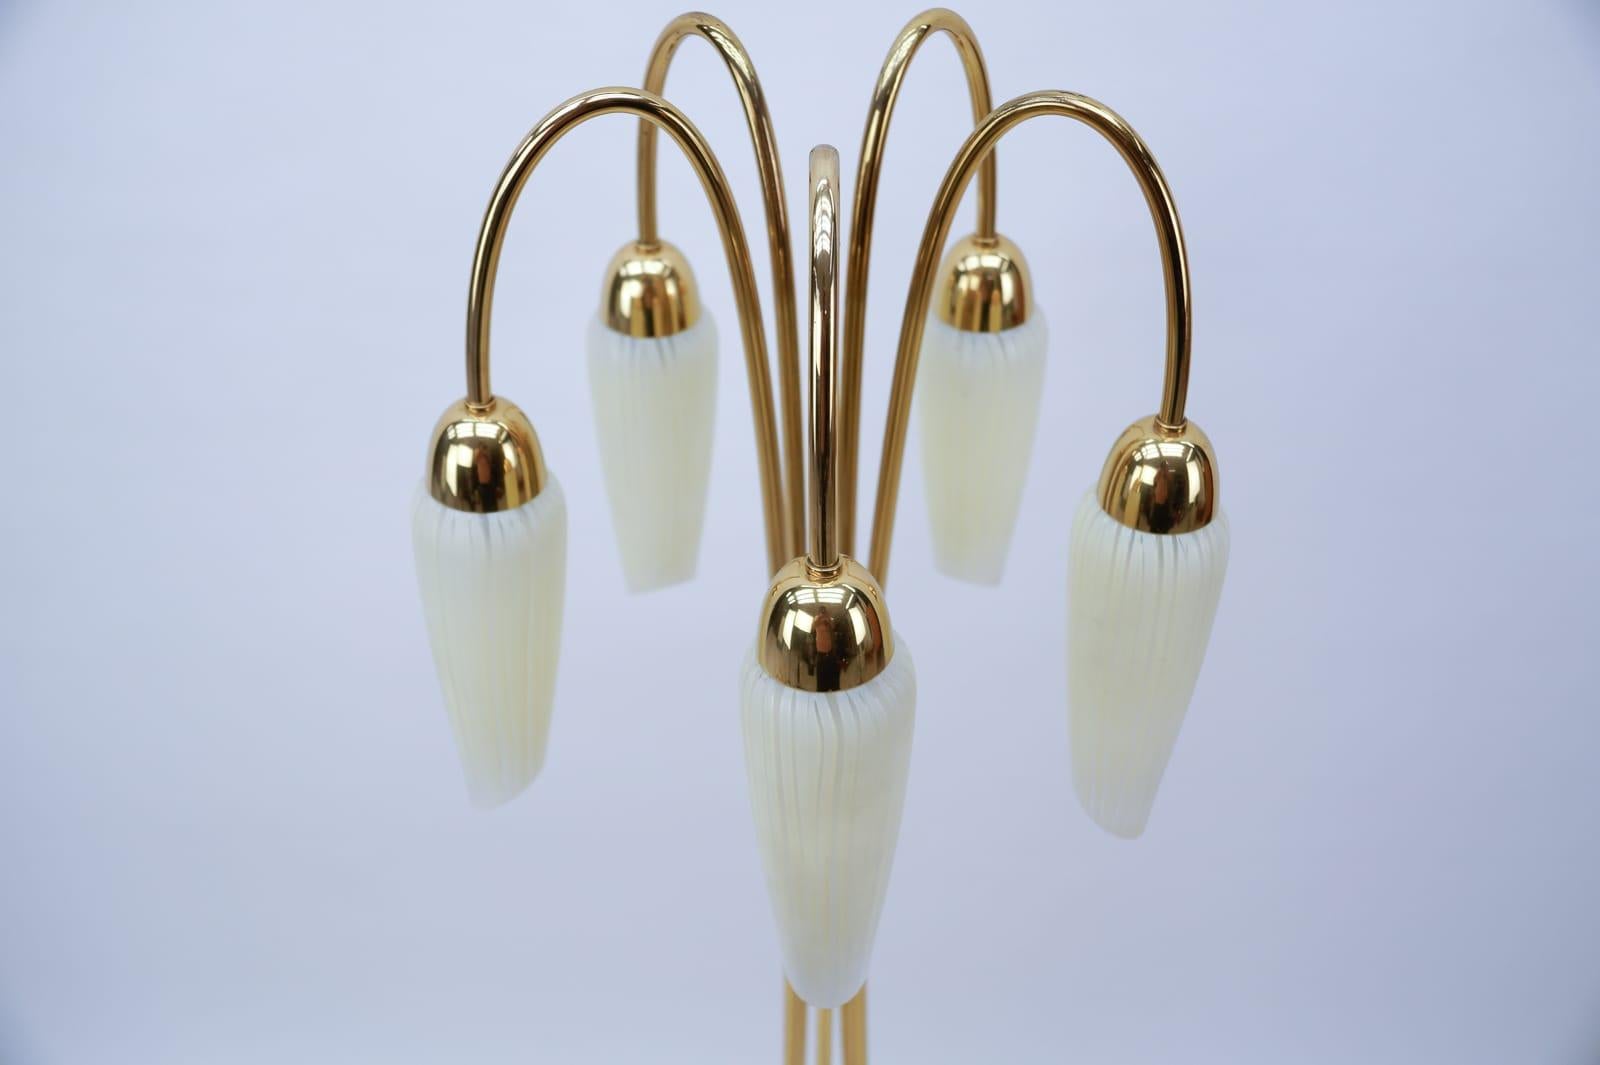 Very Rare Mid-Century Modern Floor Lamp with Five Glass Shades, 1950s Italy For Sale 1